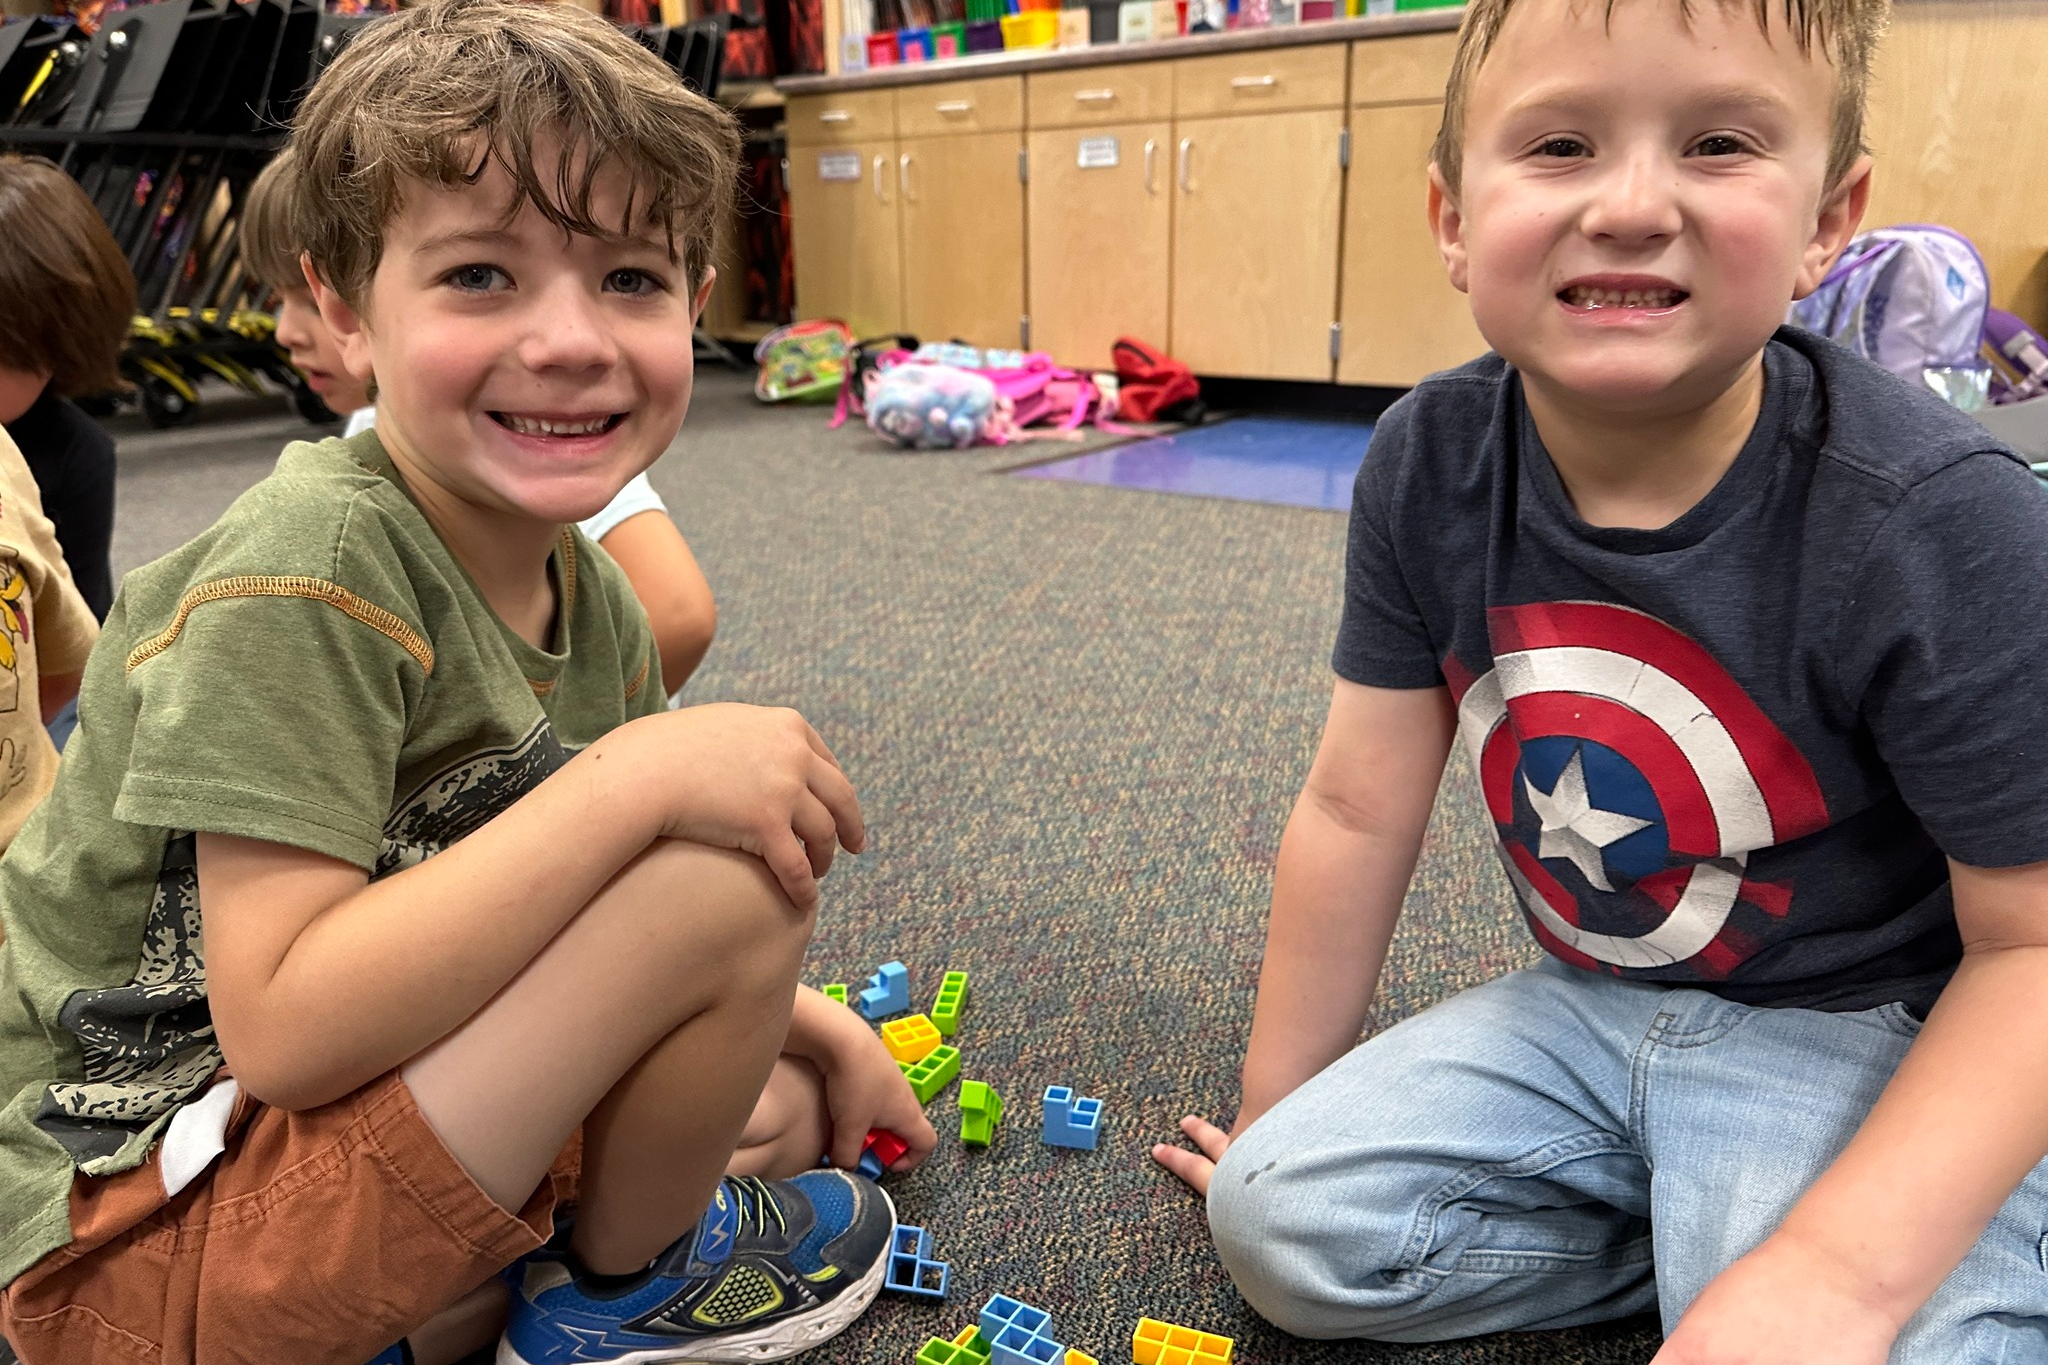 Two boys smile at the camera, with Legos scattered nearby.